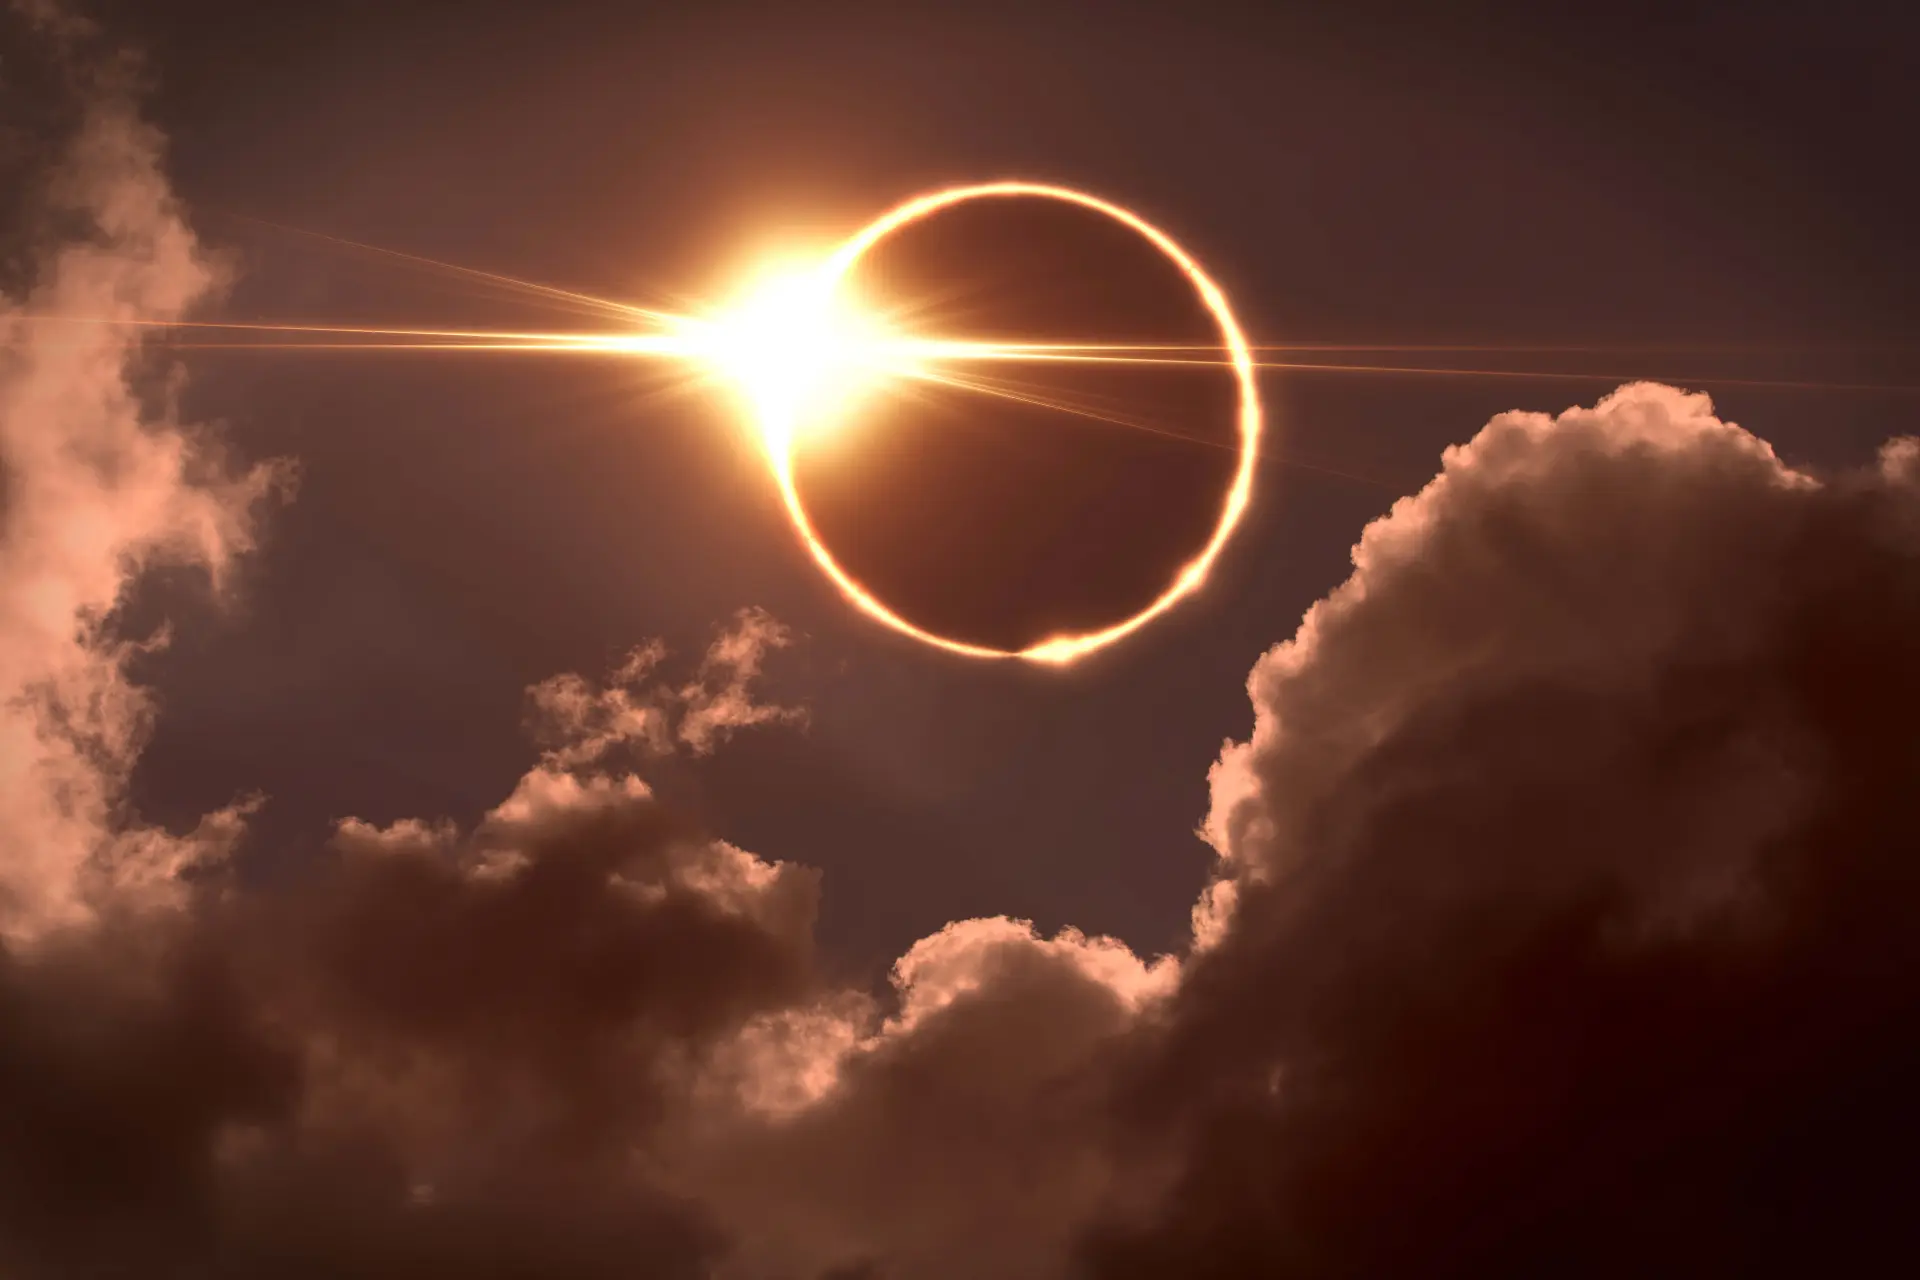 a rendering of a rare solar eclipse